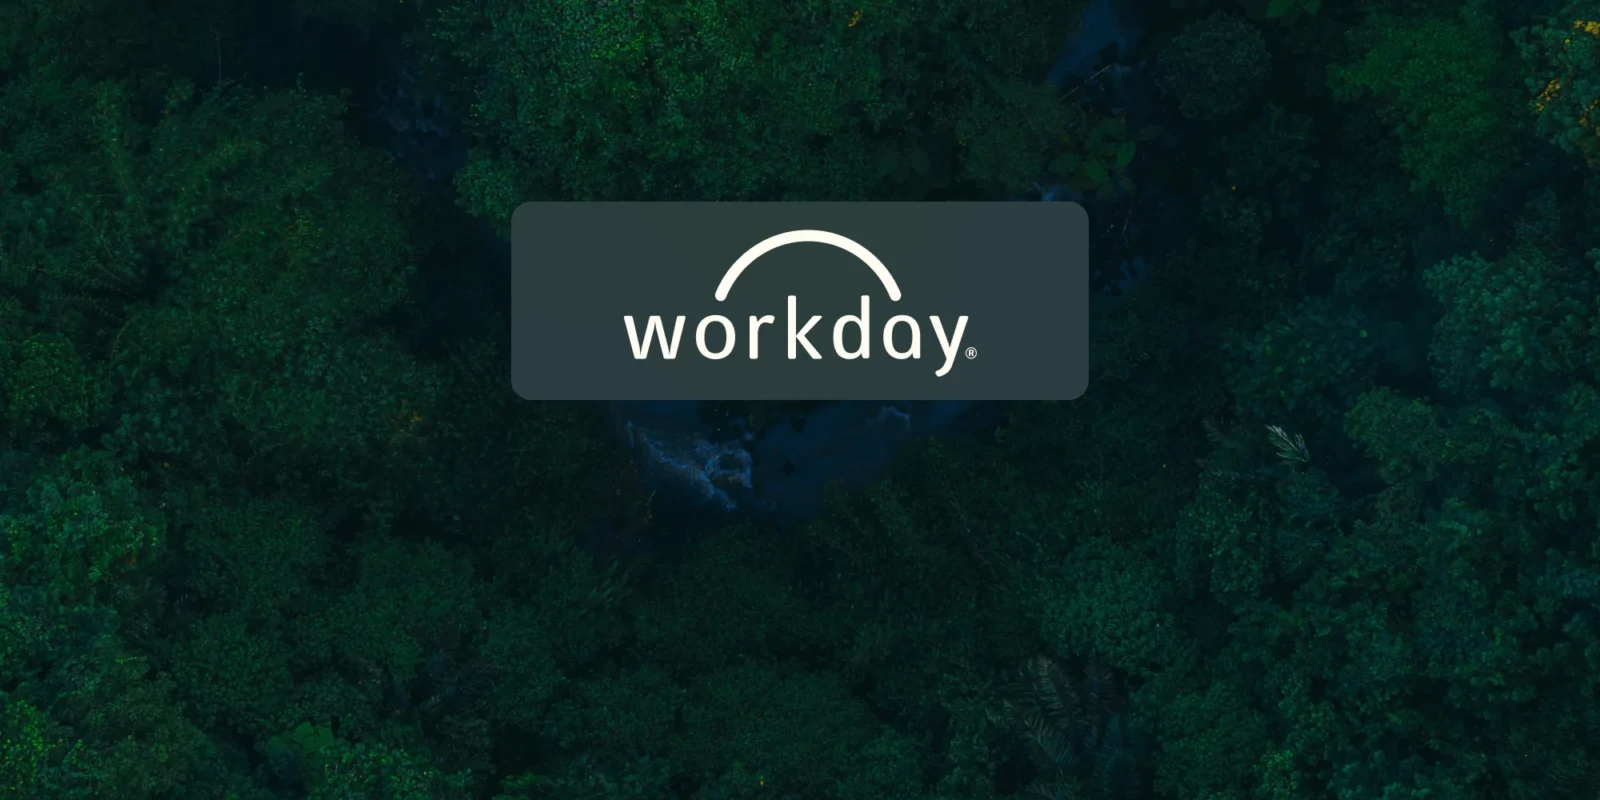 workday-21-min-6622261335d8a